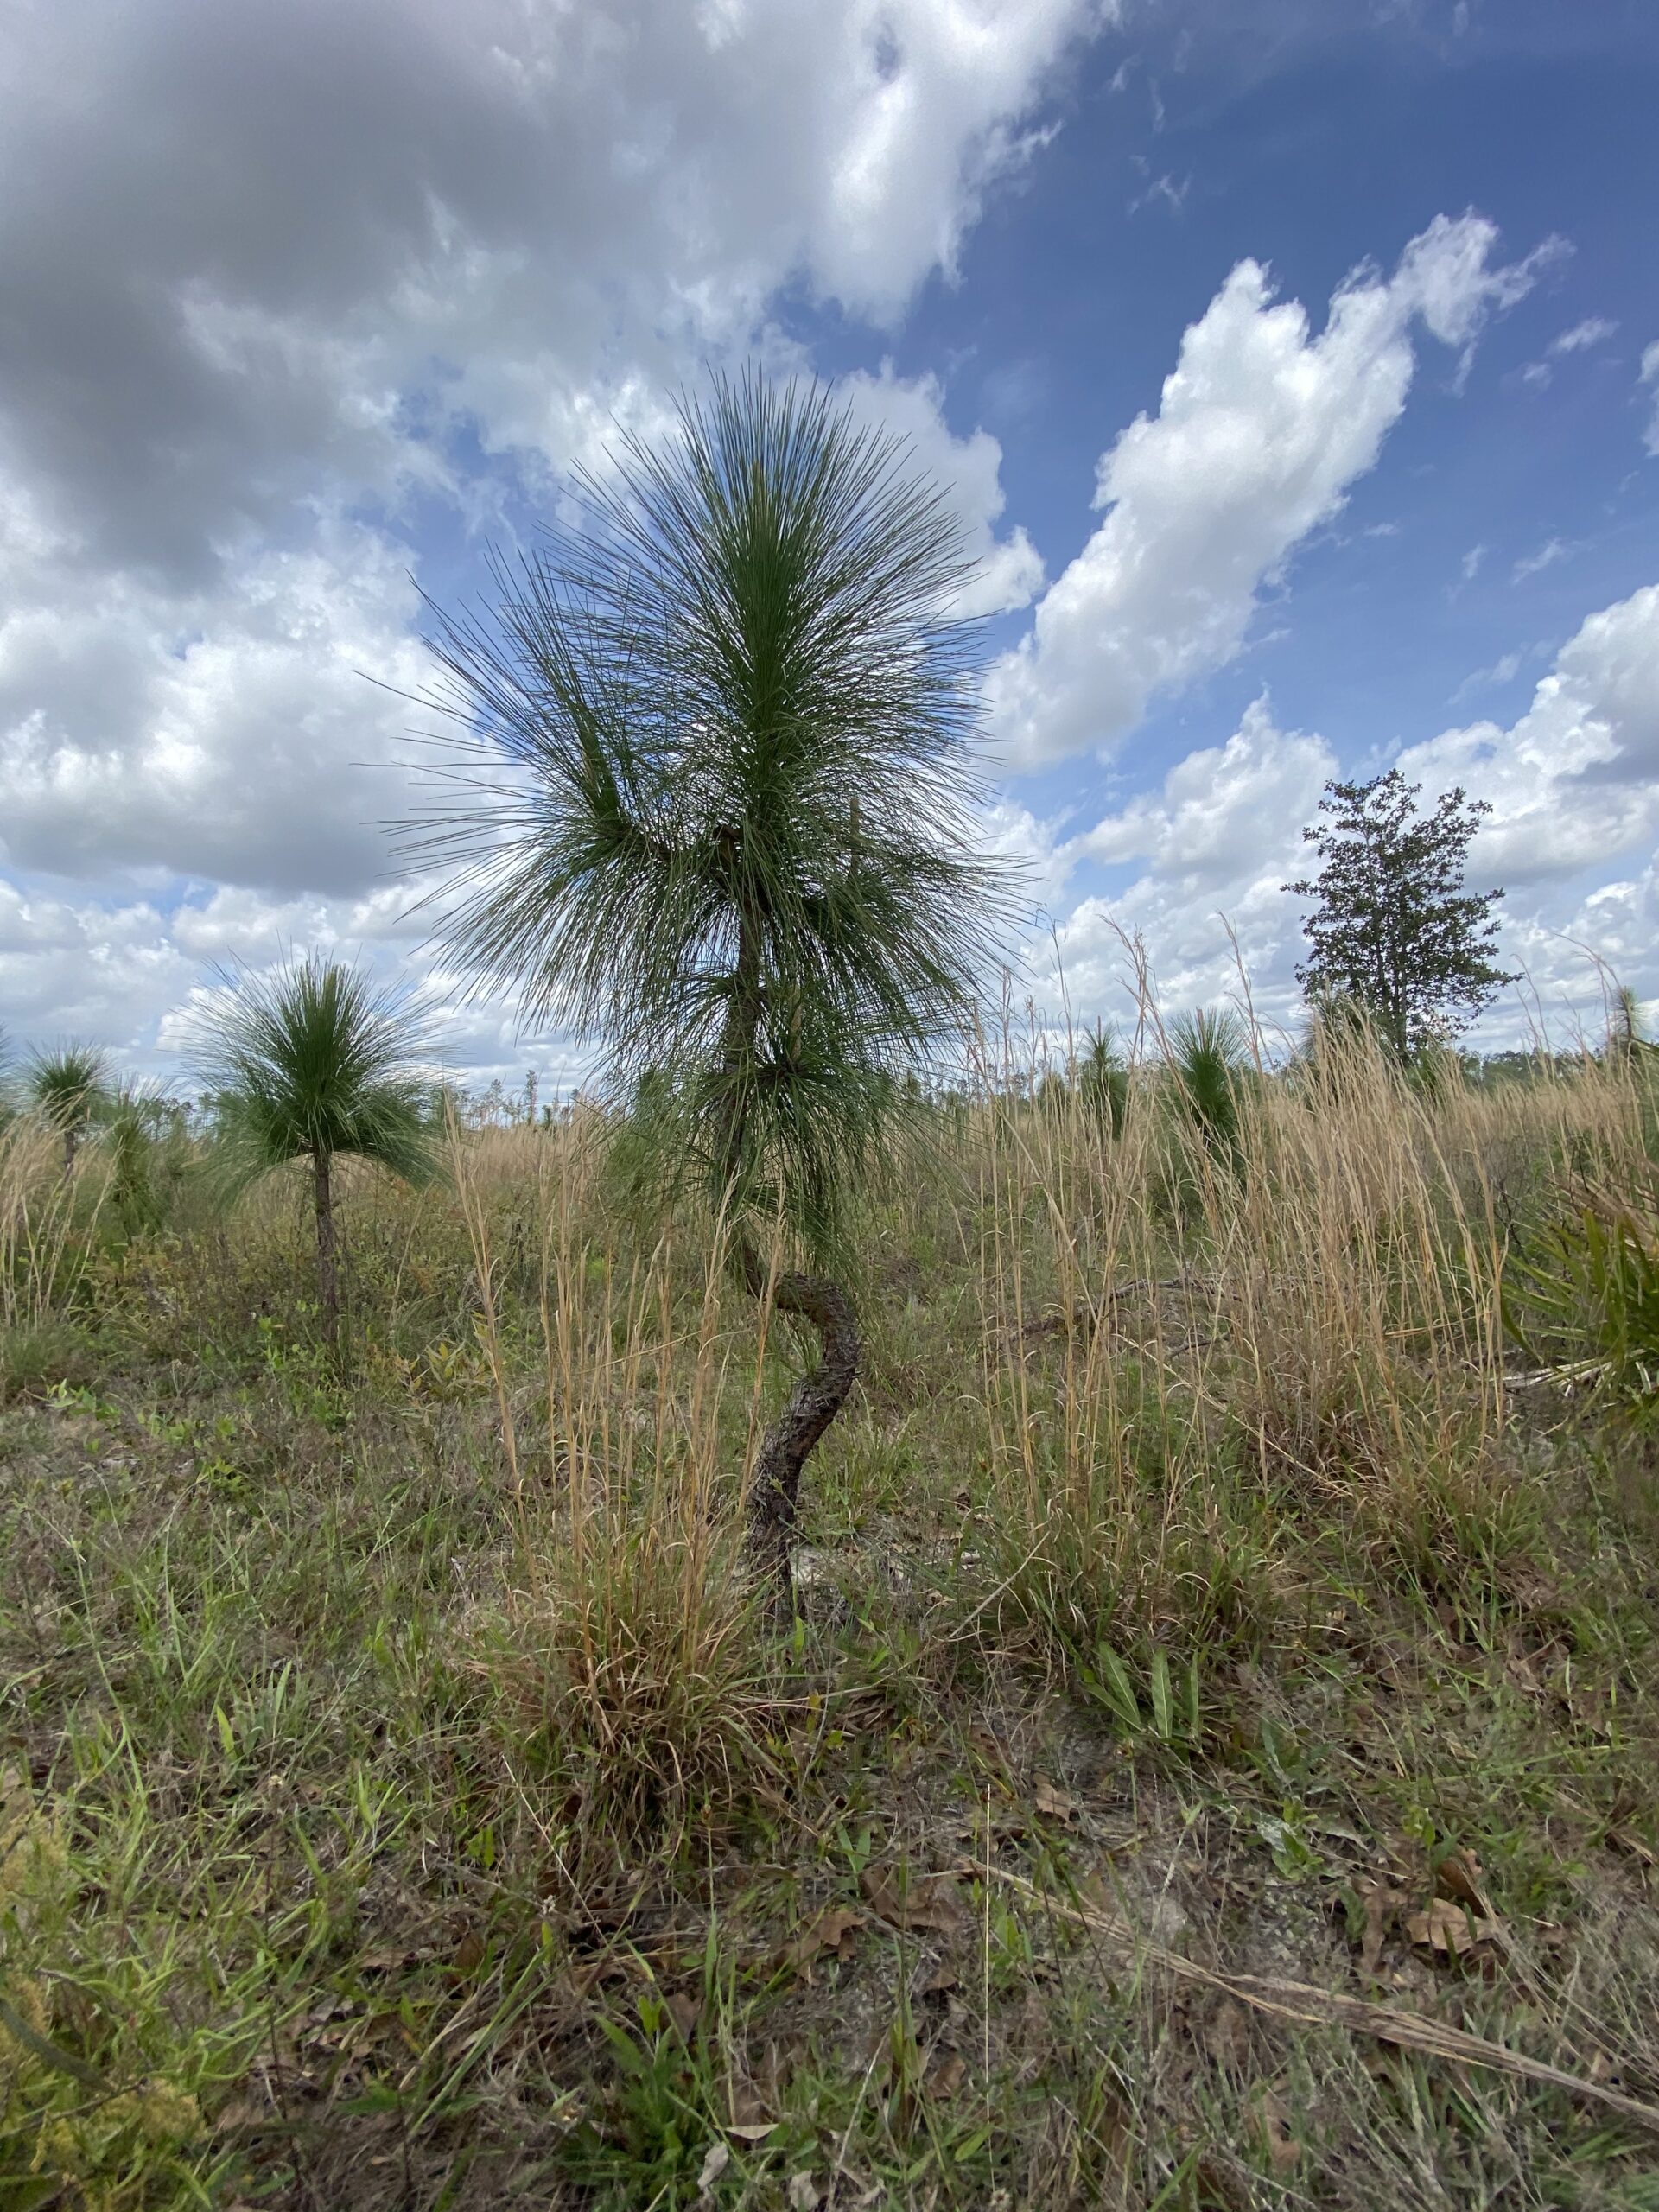 A growing sapling with a bent trunk from Hurricane Michael